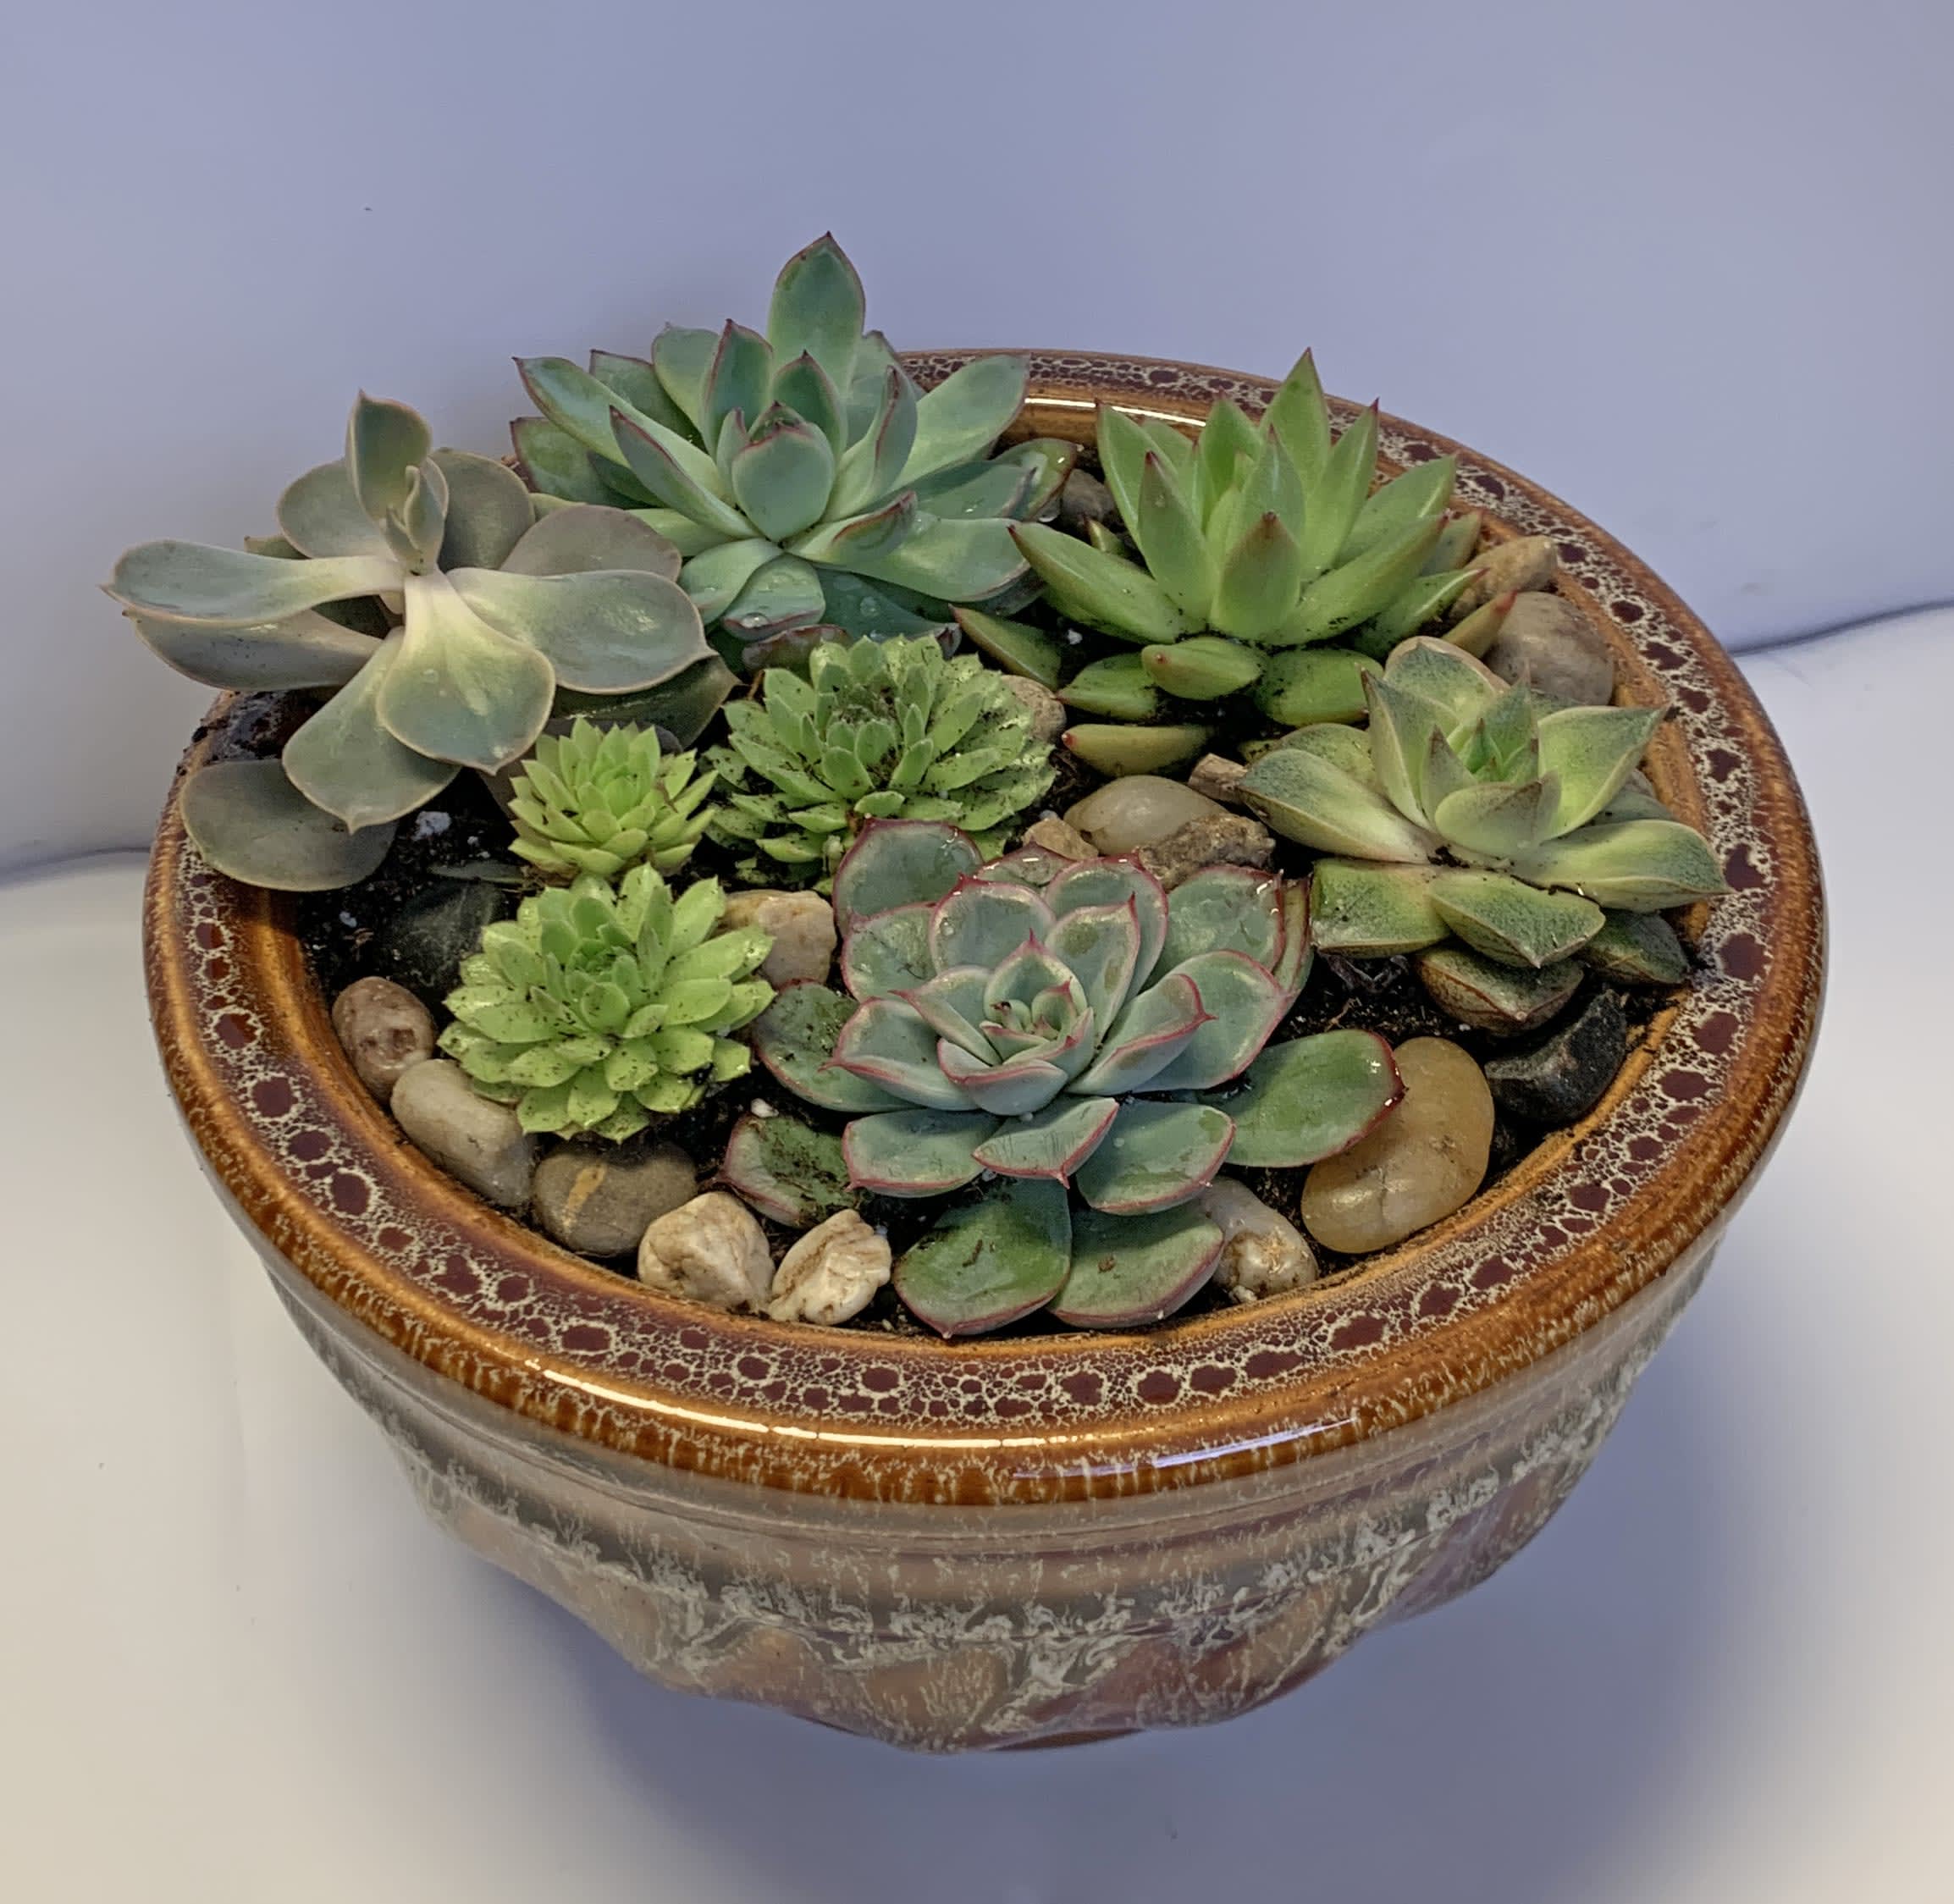 Succulent Dish Garden By Leaf And Stem